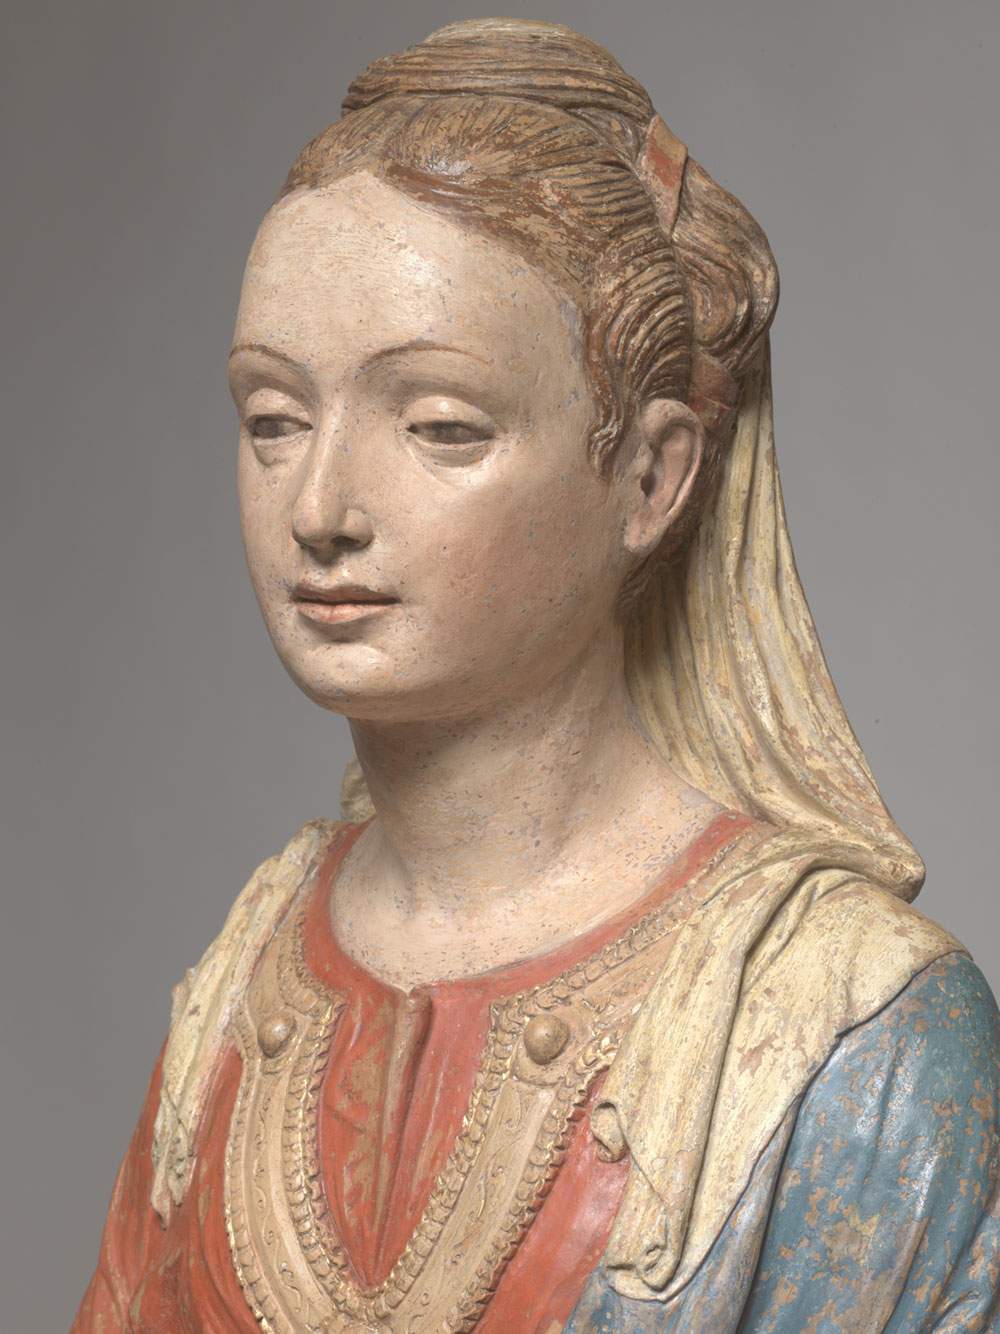 Renaissance masterpieces in terracotta, from Donatello to Riccio. On display in Padua